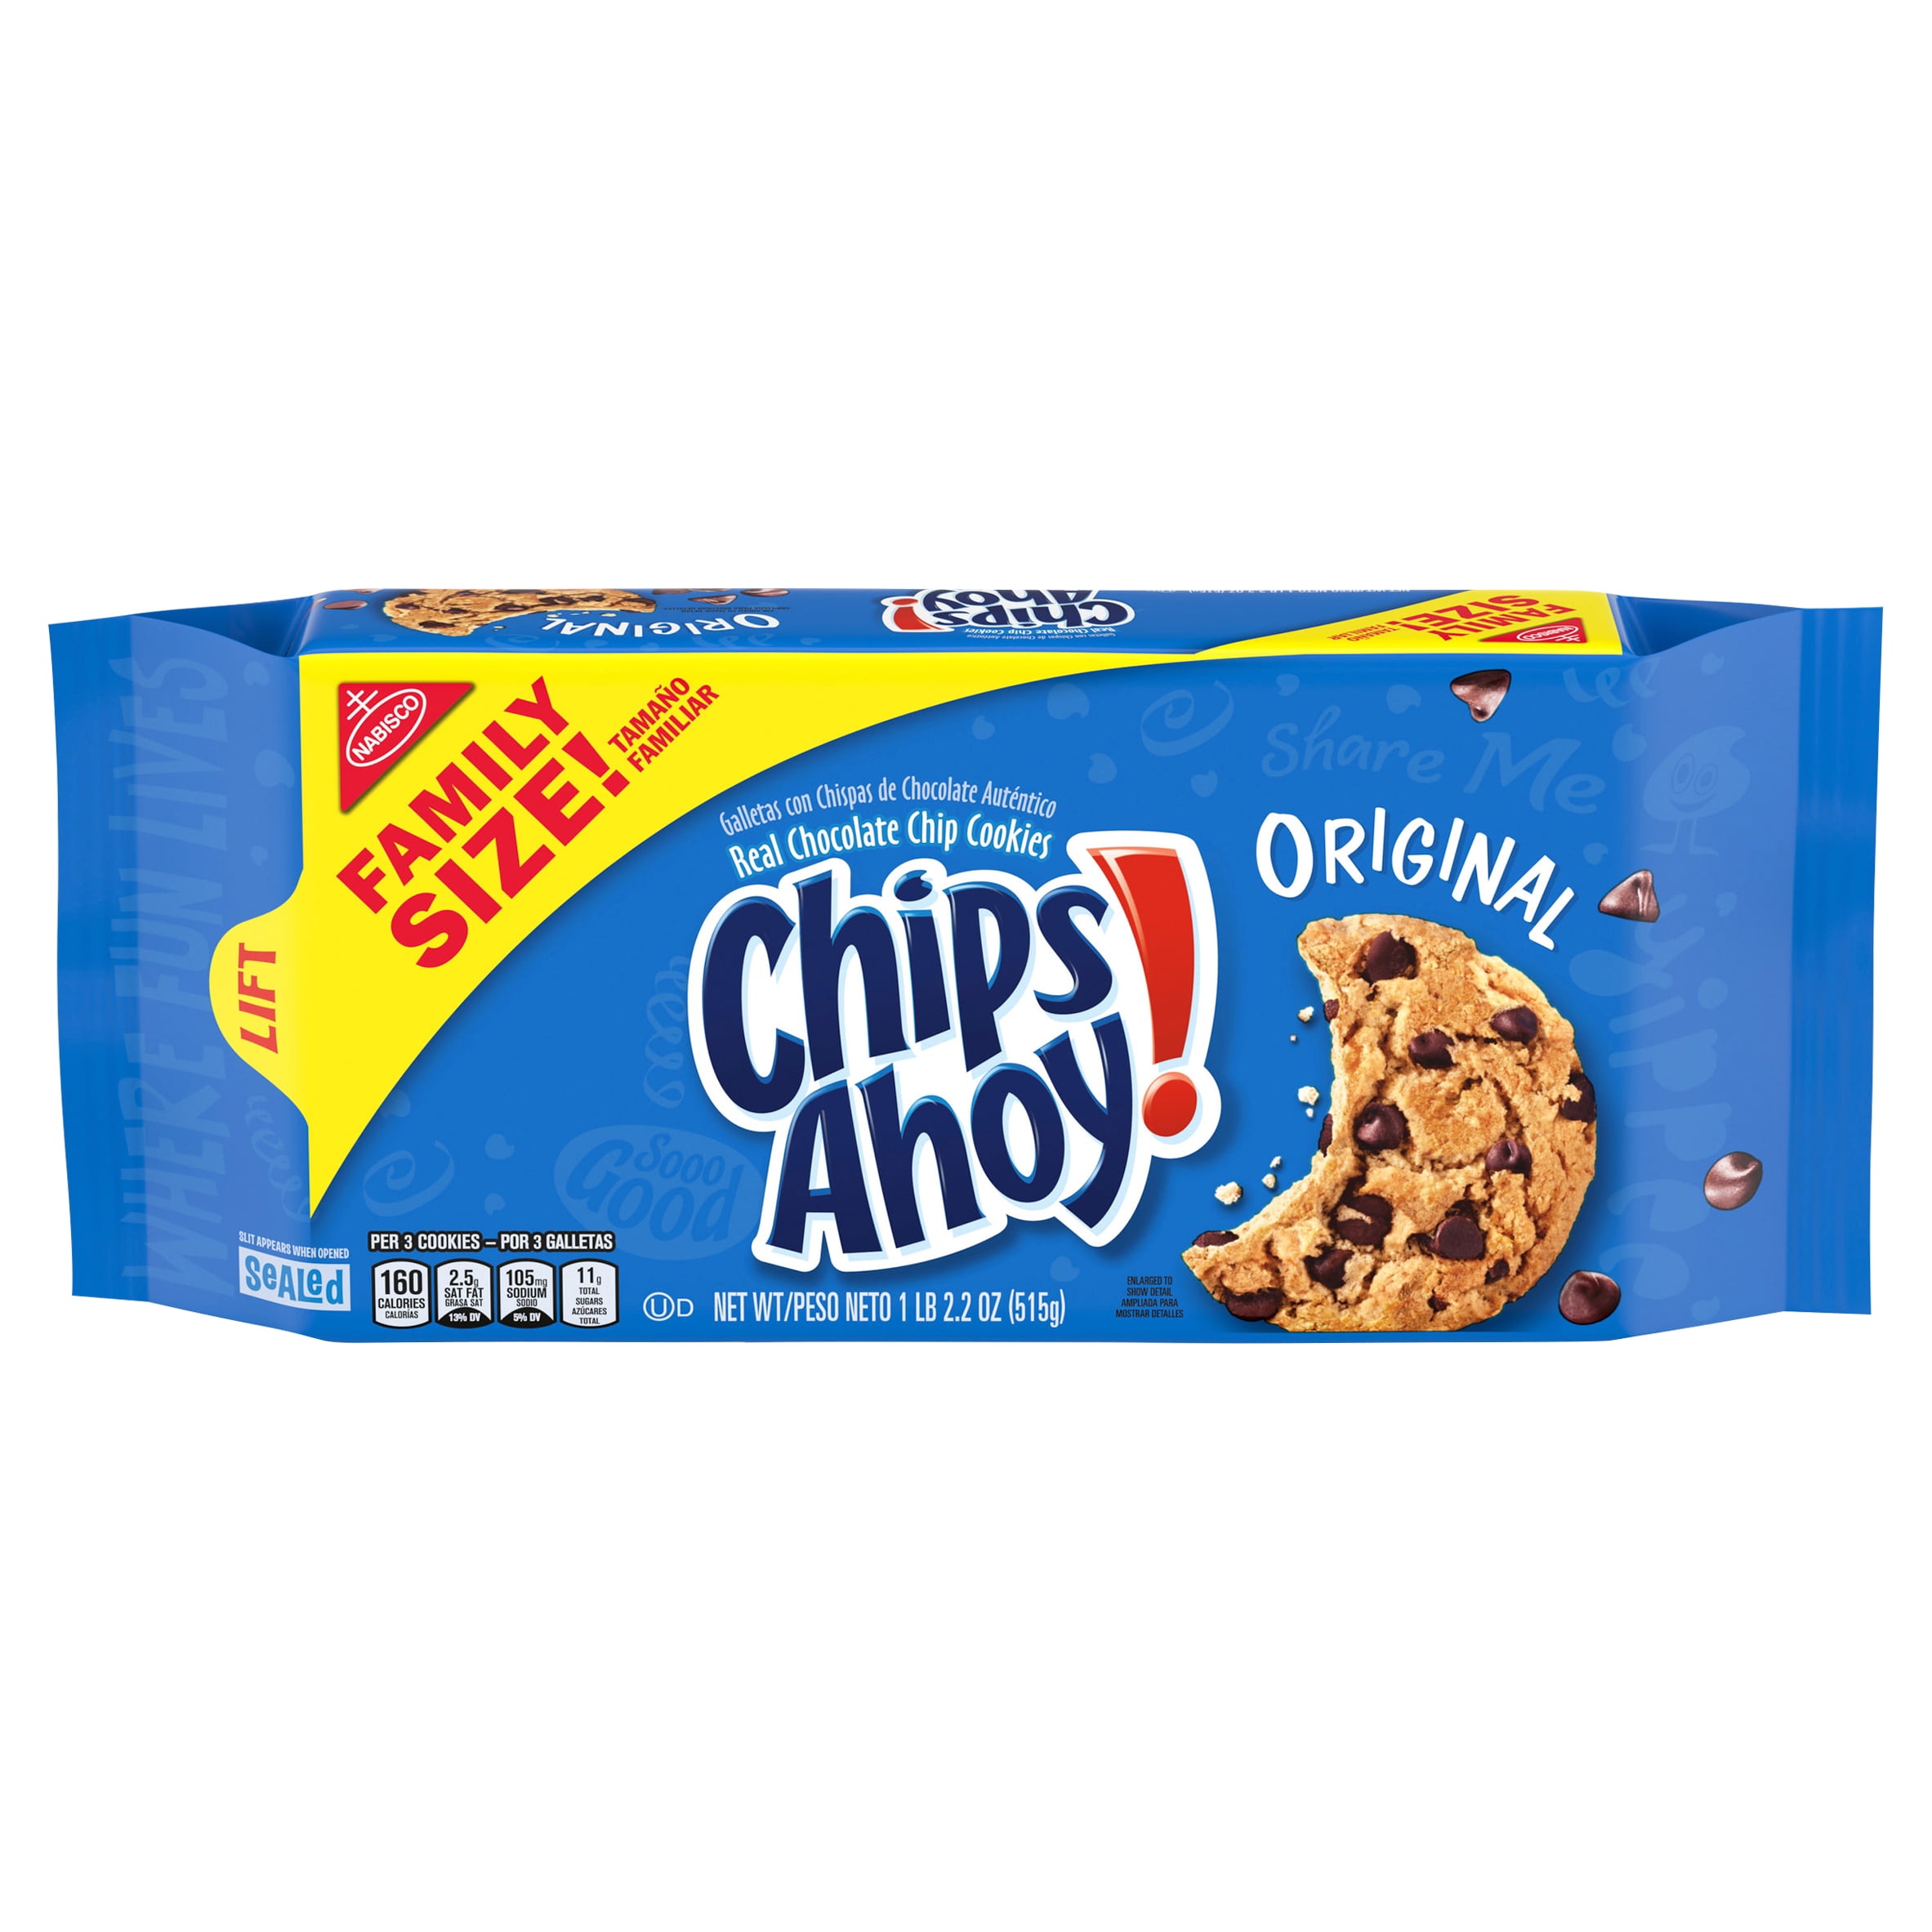 CHIPS AHOY! Original Chocolate Chip Cookies, Family Size, 18.2 oz ... - 7a5bc20a Bb13 4D66 908a 5ce0430Df89f.940b488a7aa649630699D9fca64D7afb